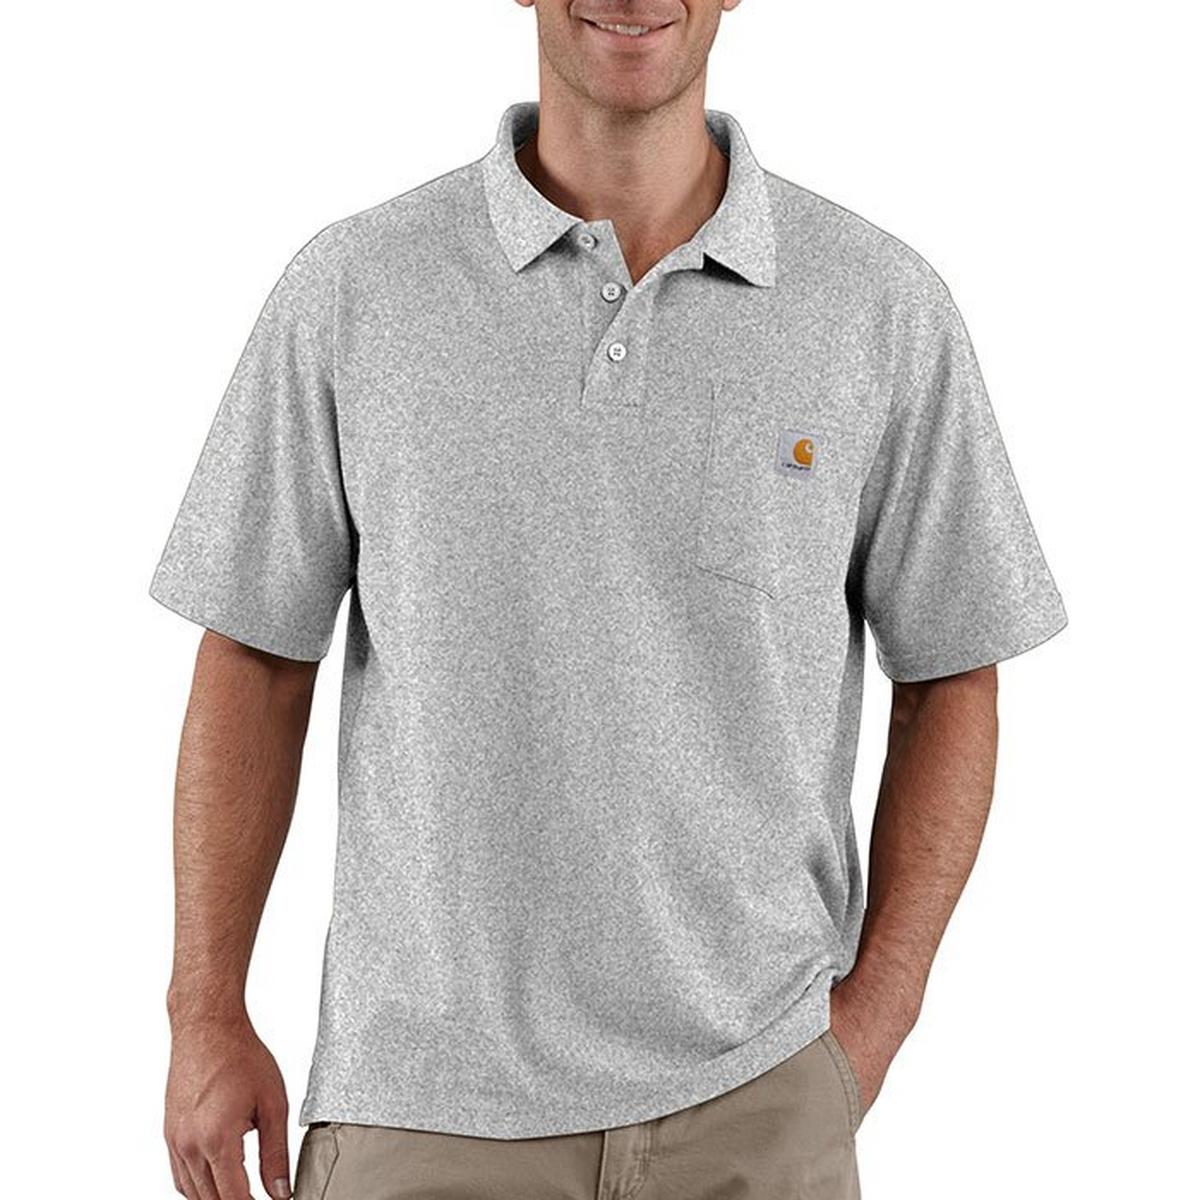 Men's Loose Fit Midweight Pocket Polo